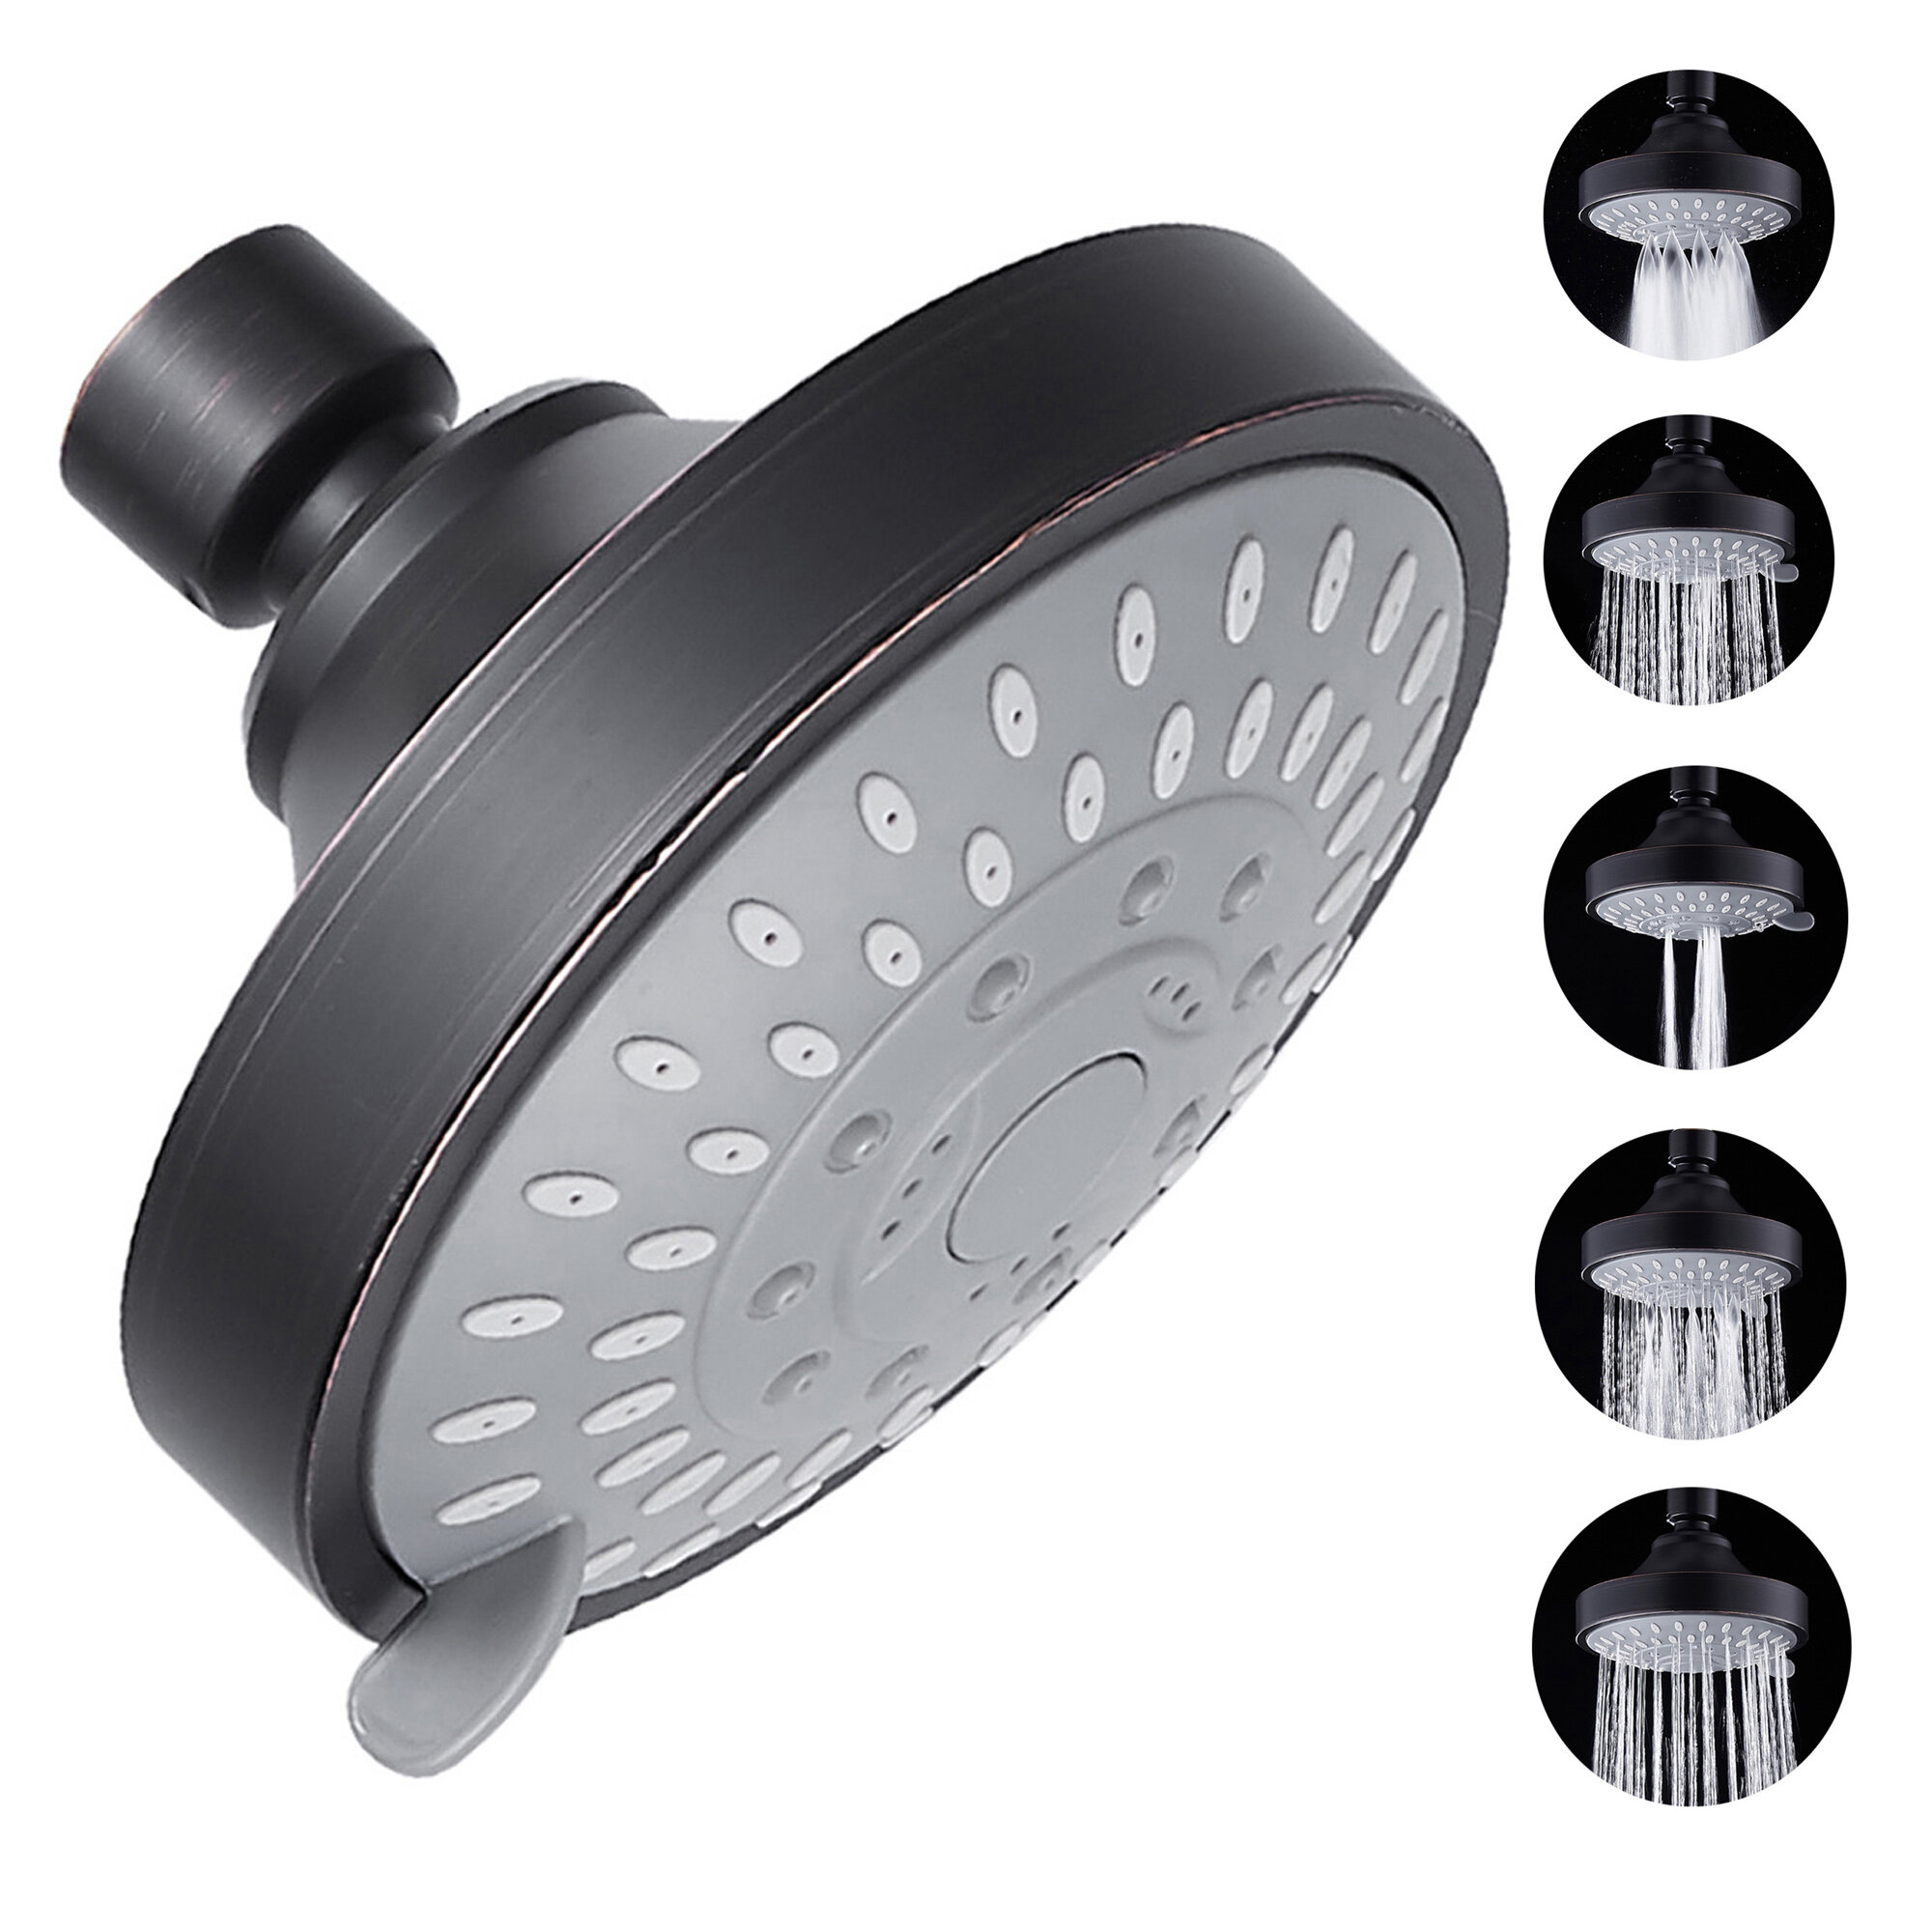 Purist 2.5 GPM Fixed Shower Head & Reviews